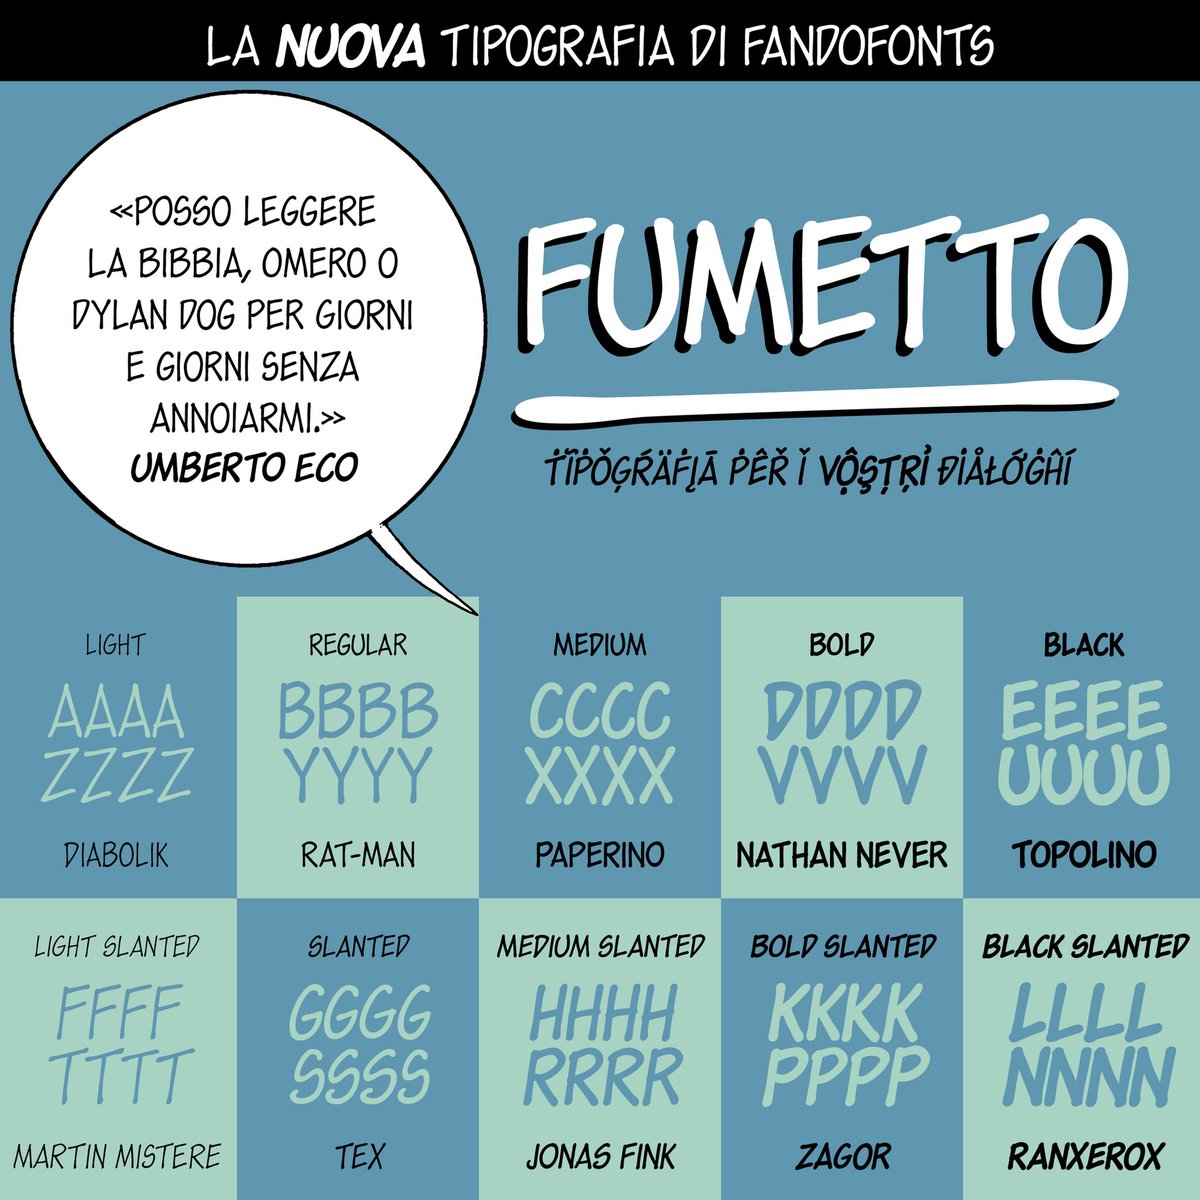 Fando Fonts Well I Open The Rest Of T Co Zdfgny4sc7 With A Portfolio An Little Update Of Fonteys Of Albertmonteys And A Brand New Font Fumetto T Co X9n5rt8csz Download It Comic Comicfont